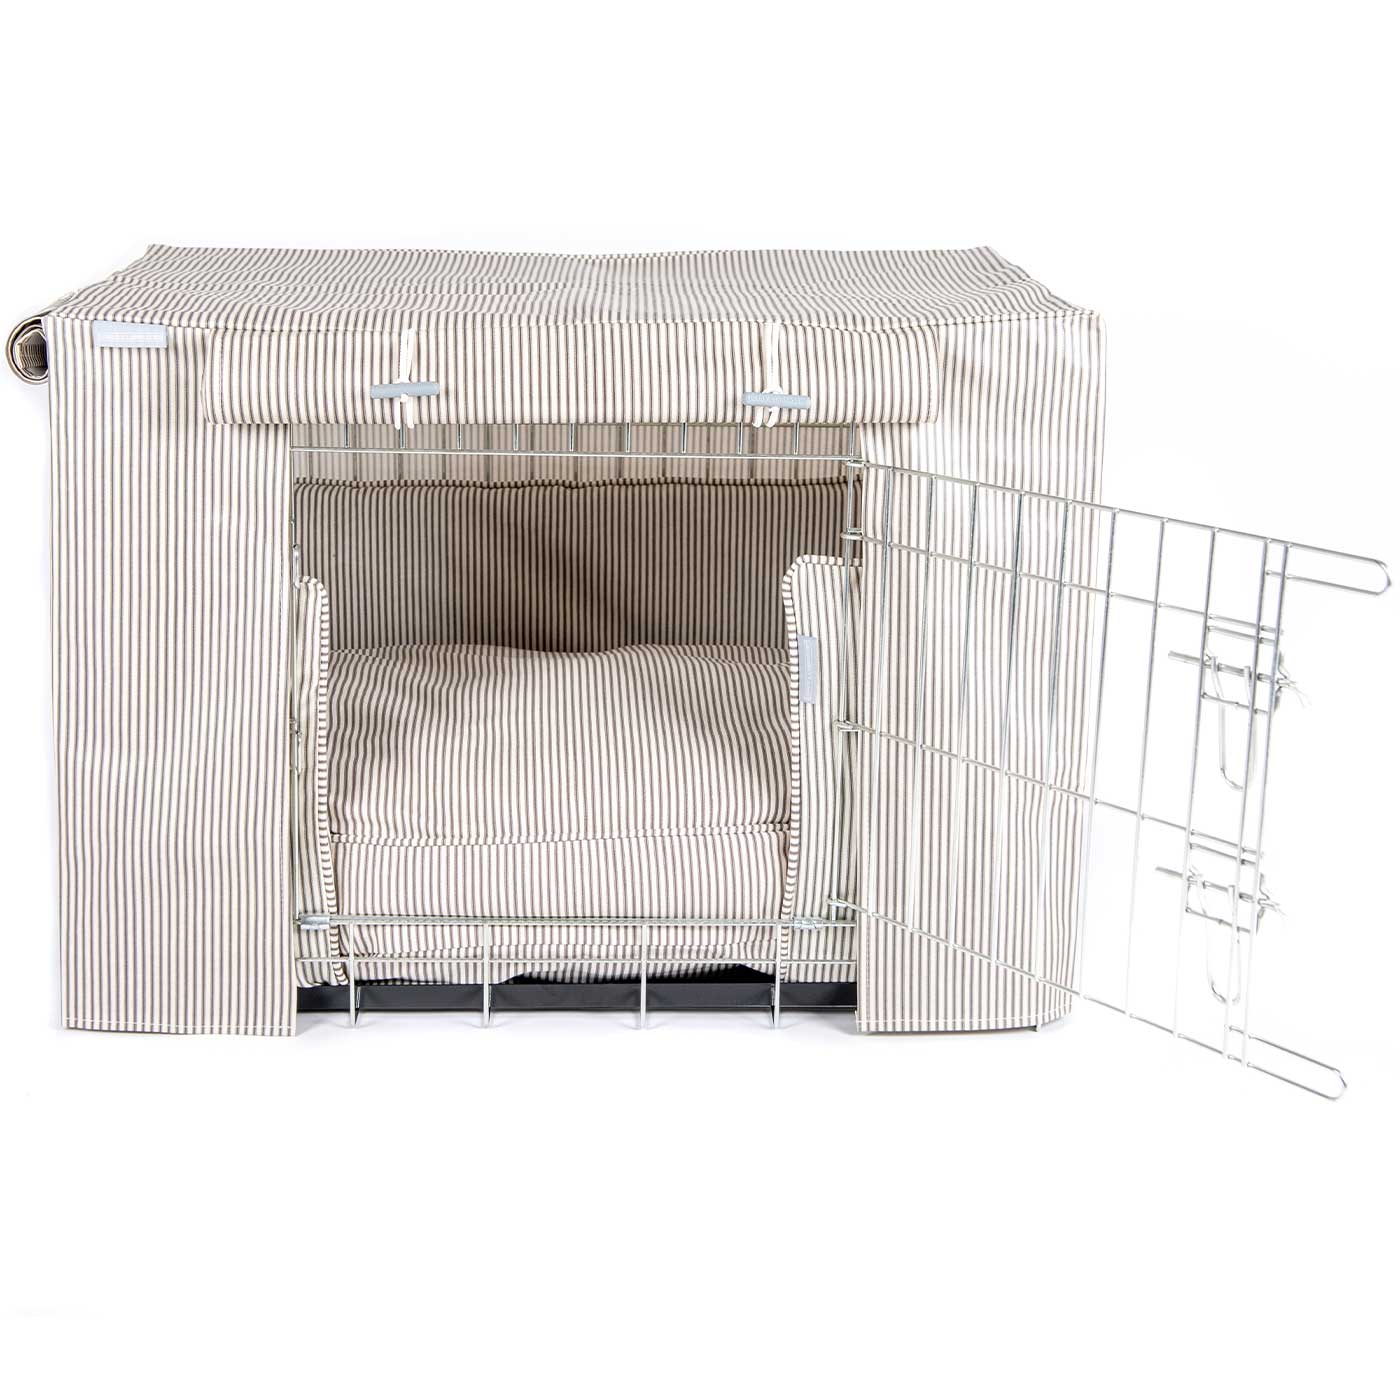 Luxury Silver Dog Cage Set With Cushion, Bumper and Cage Cover, In Regency Stripe Oil Cloth. The Perfect Dog Cage For The Ultimate Naptime, Available Now at Lords & Labradors US